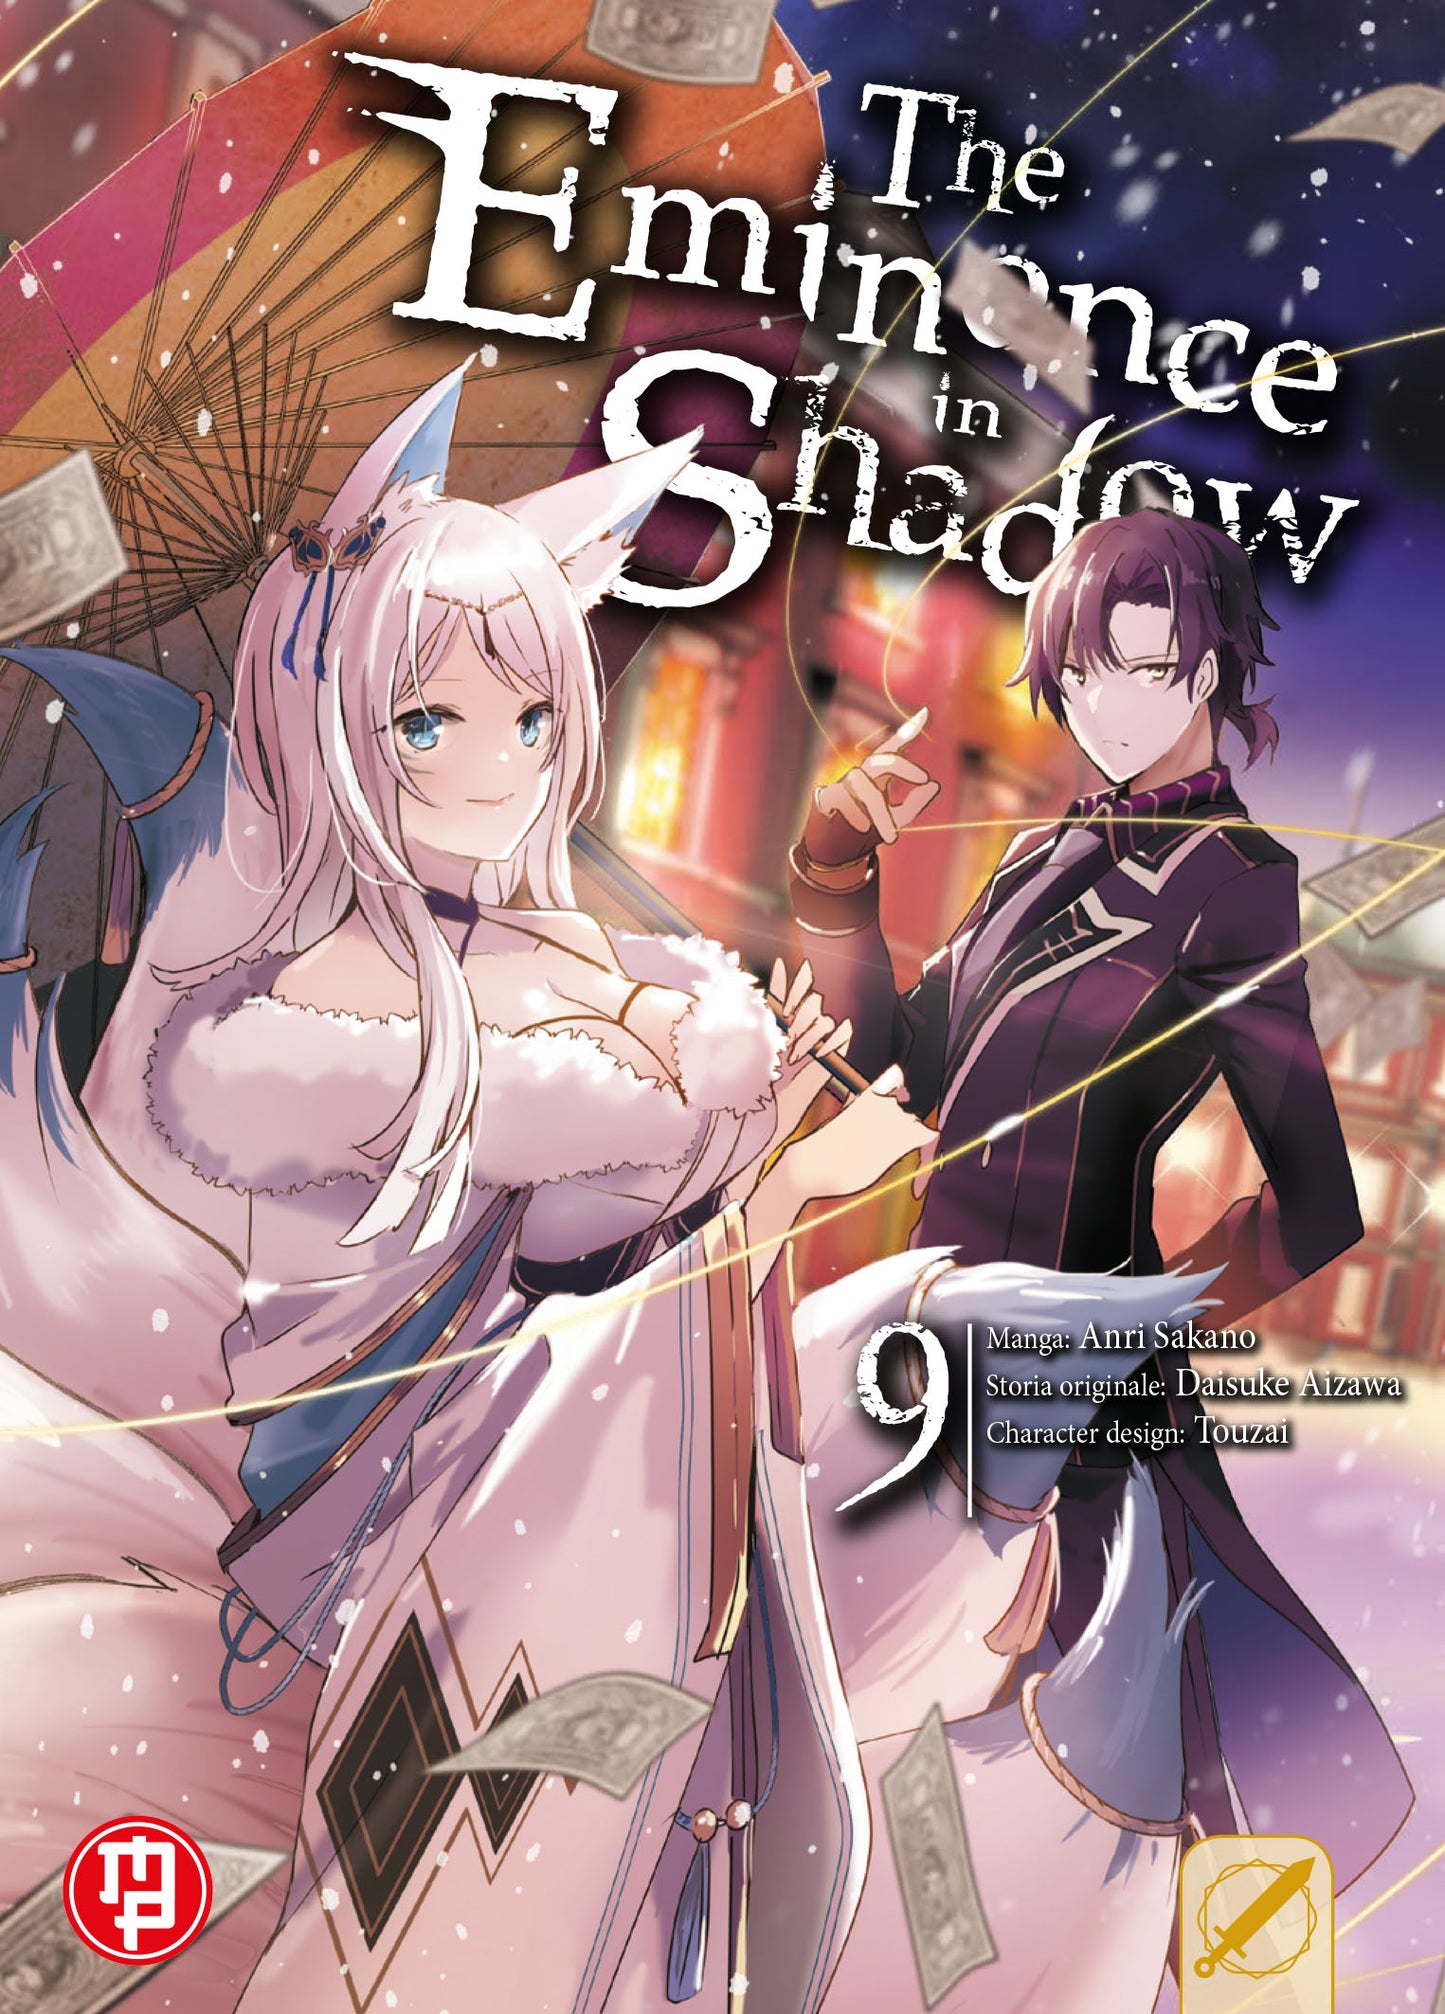 THE EMINENCE IN SHADOW VOL.9